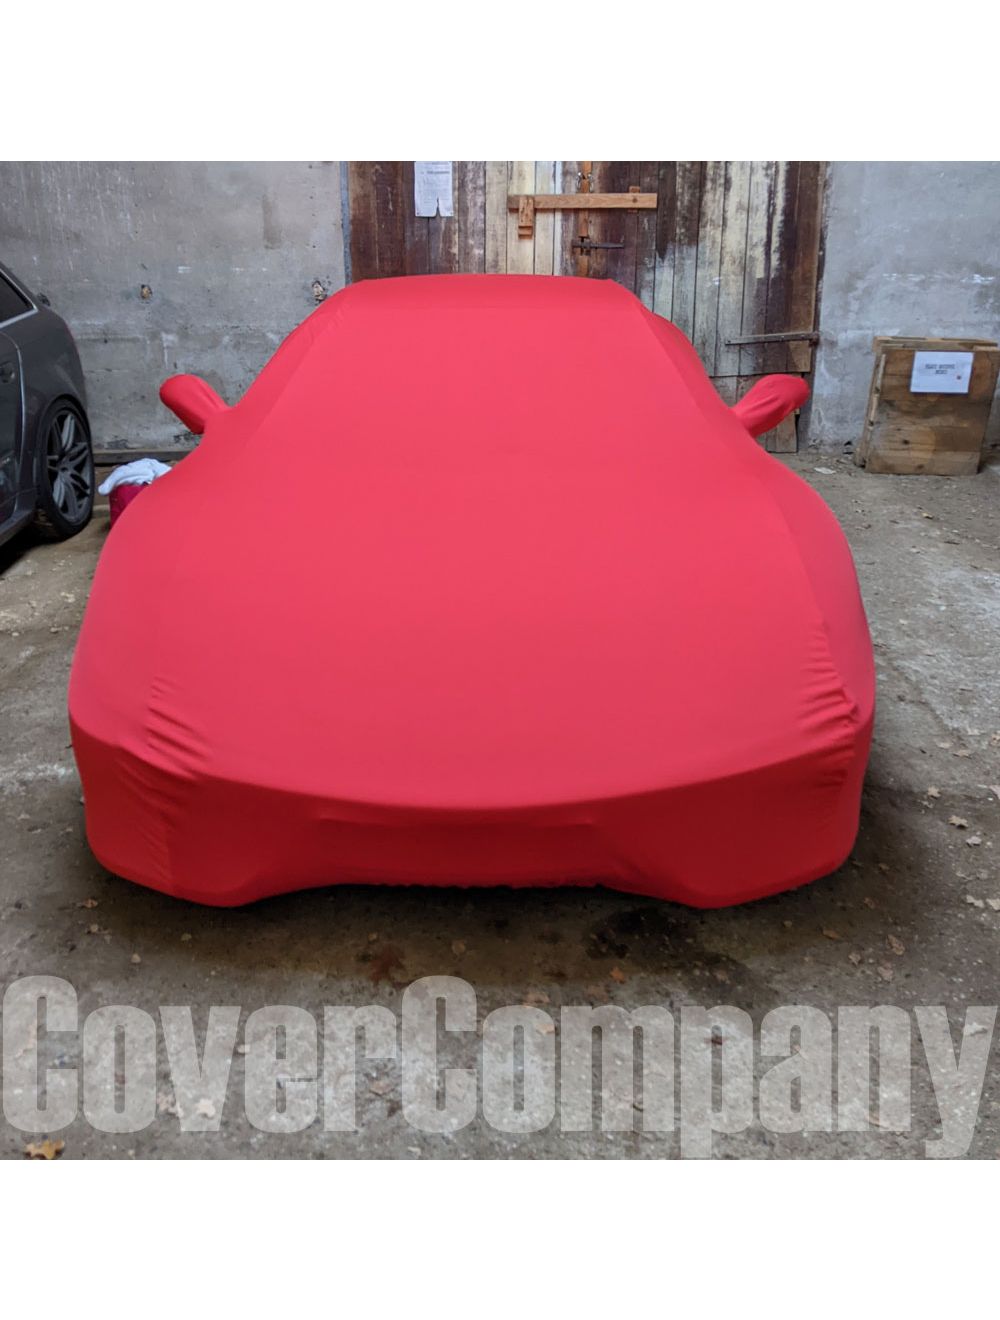 Perfect Fit for F (Italian Sports) Car Cover - Indoor Silver Range